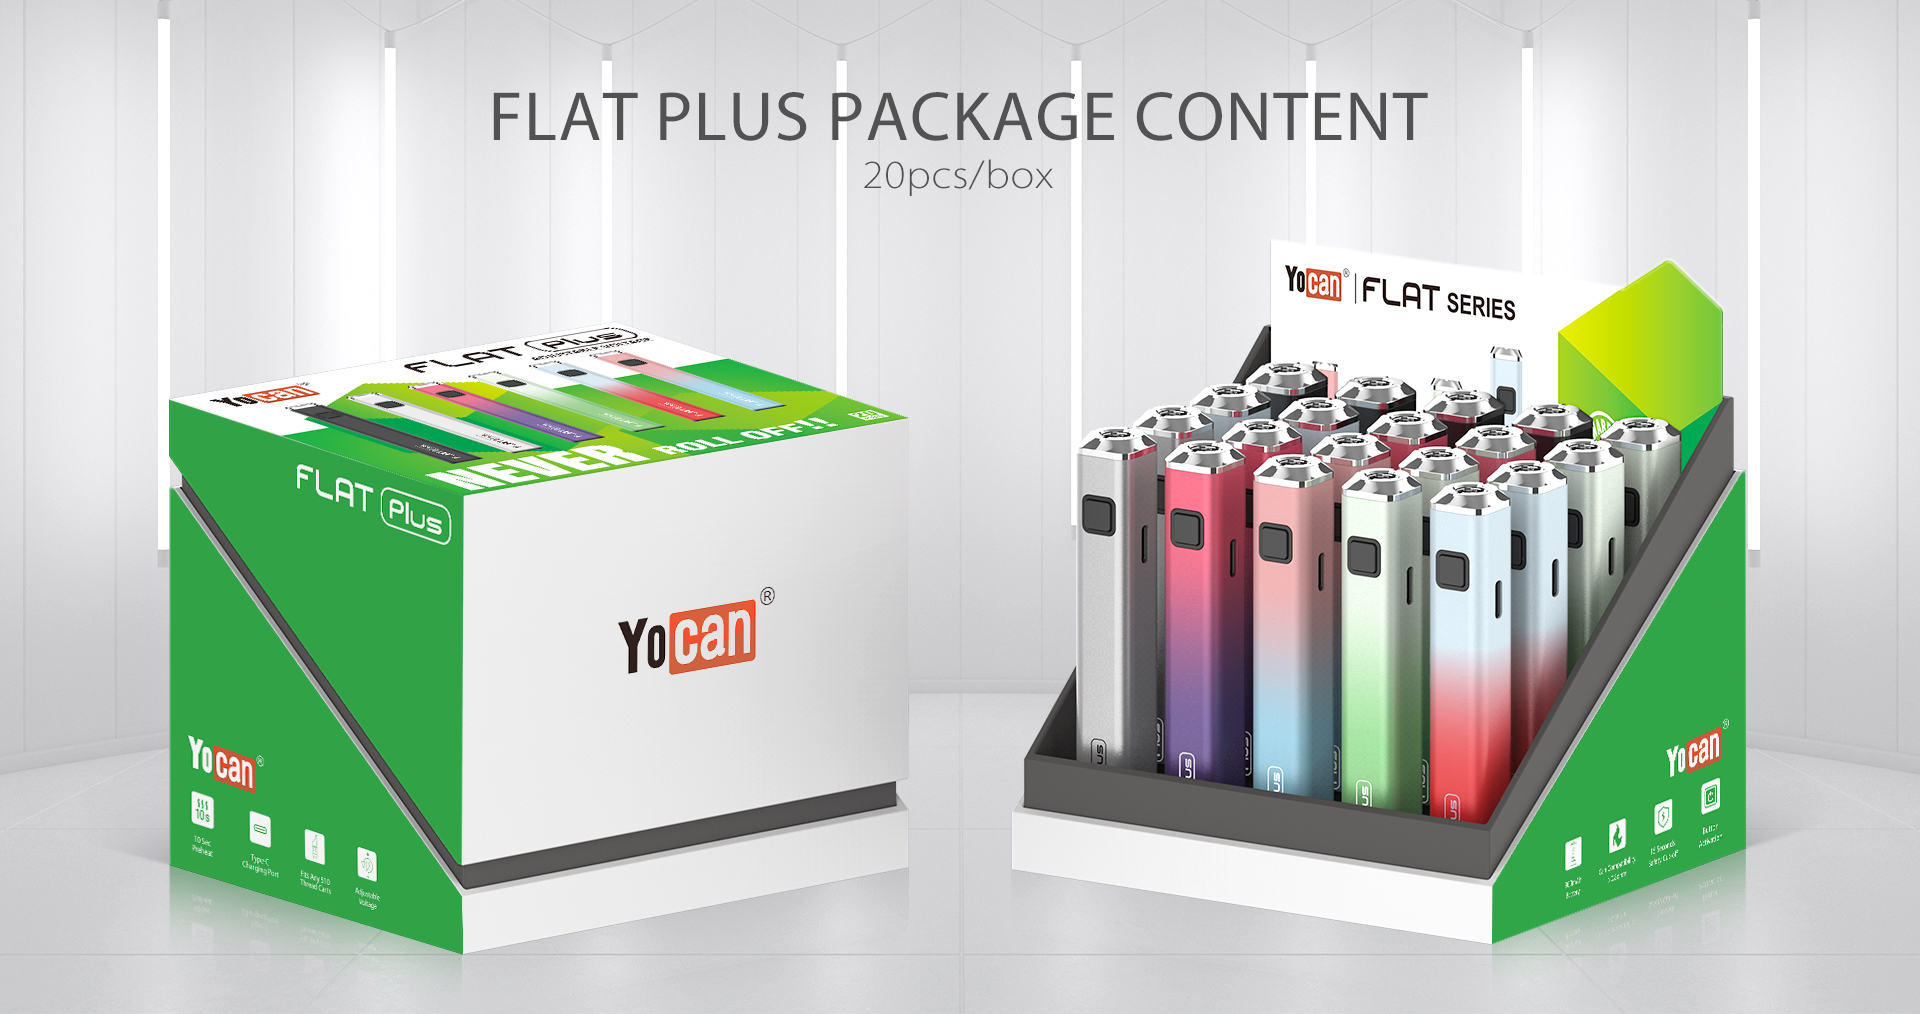 The package of Yocan Flat Plus 510 thread vape pen